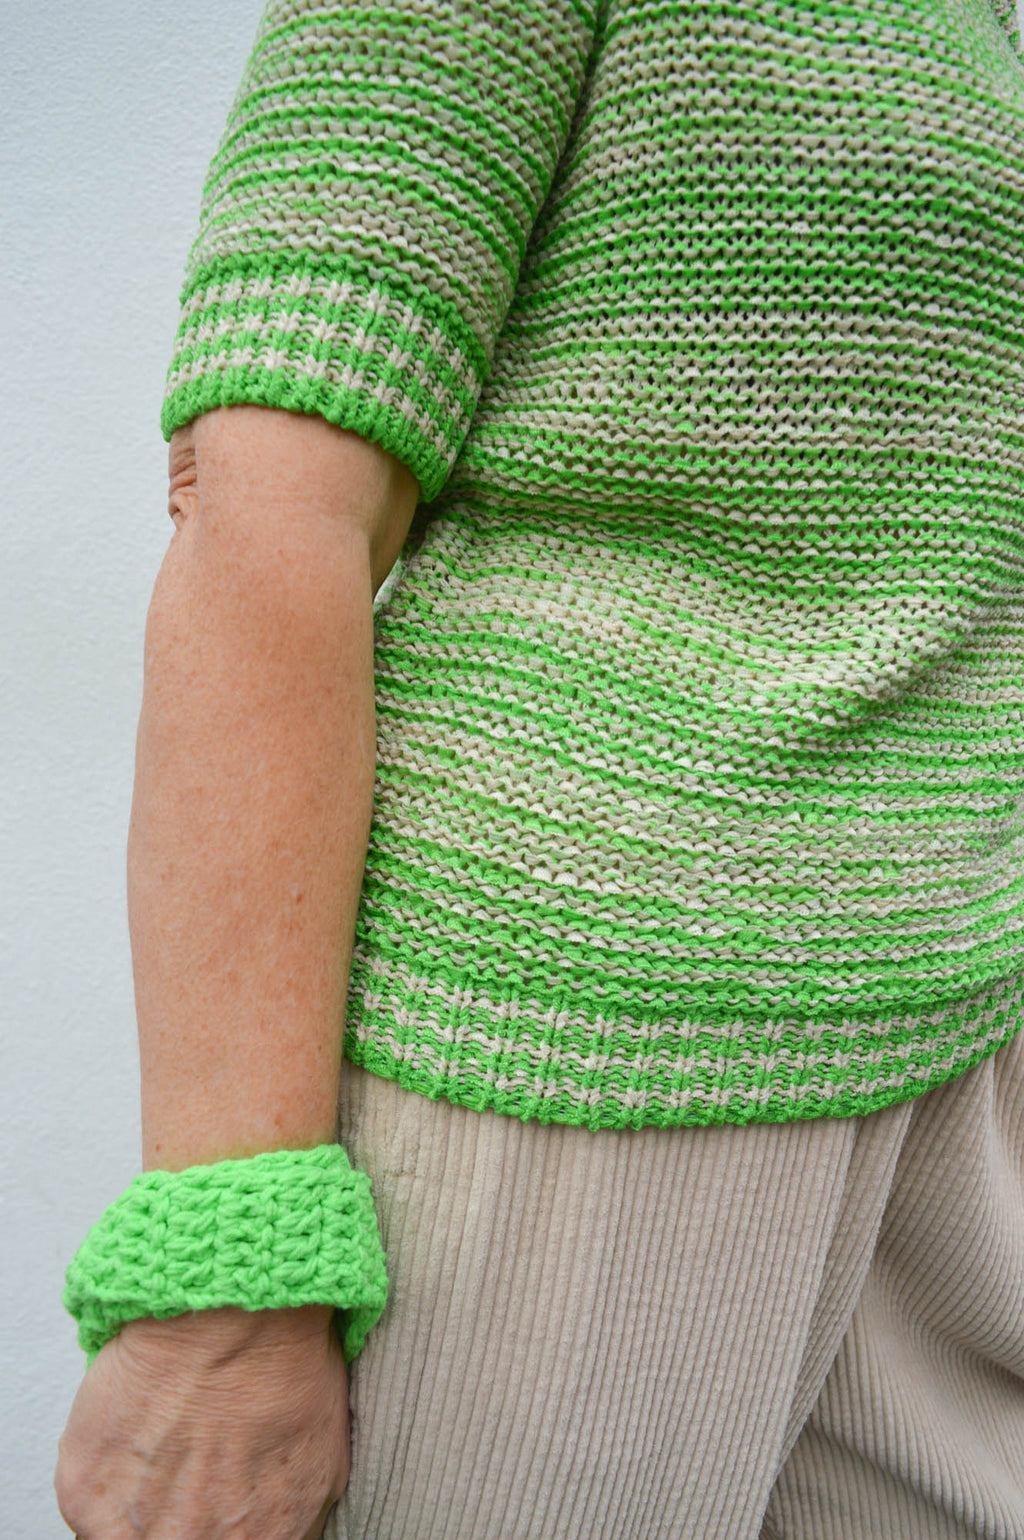 Object First Knit Vibrant Green Sweater - The Mercantile London